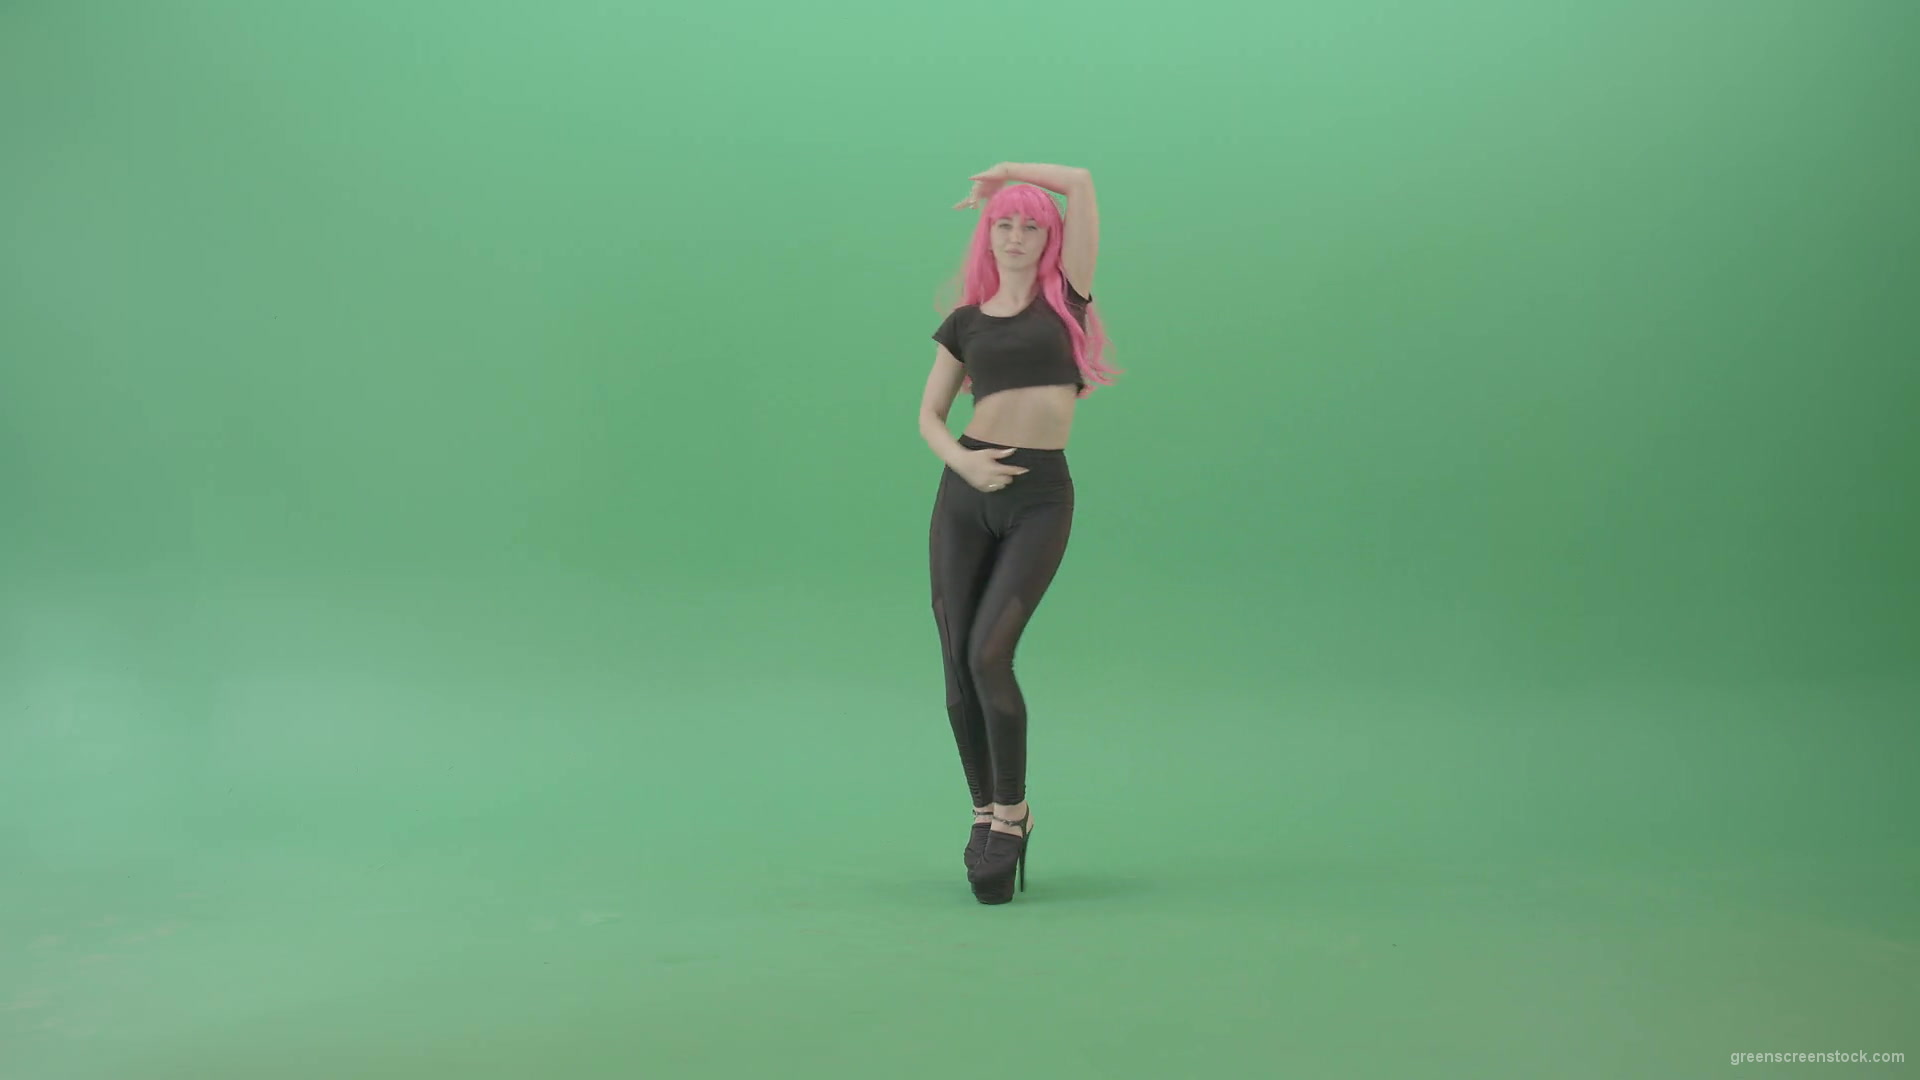 Pink-hair-girl-showing-sexy-moves-dancing-strip-on-green-screen-4K-Video-Footage-1920_008 Green Screen Stock